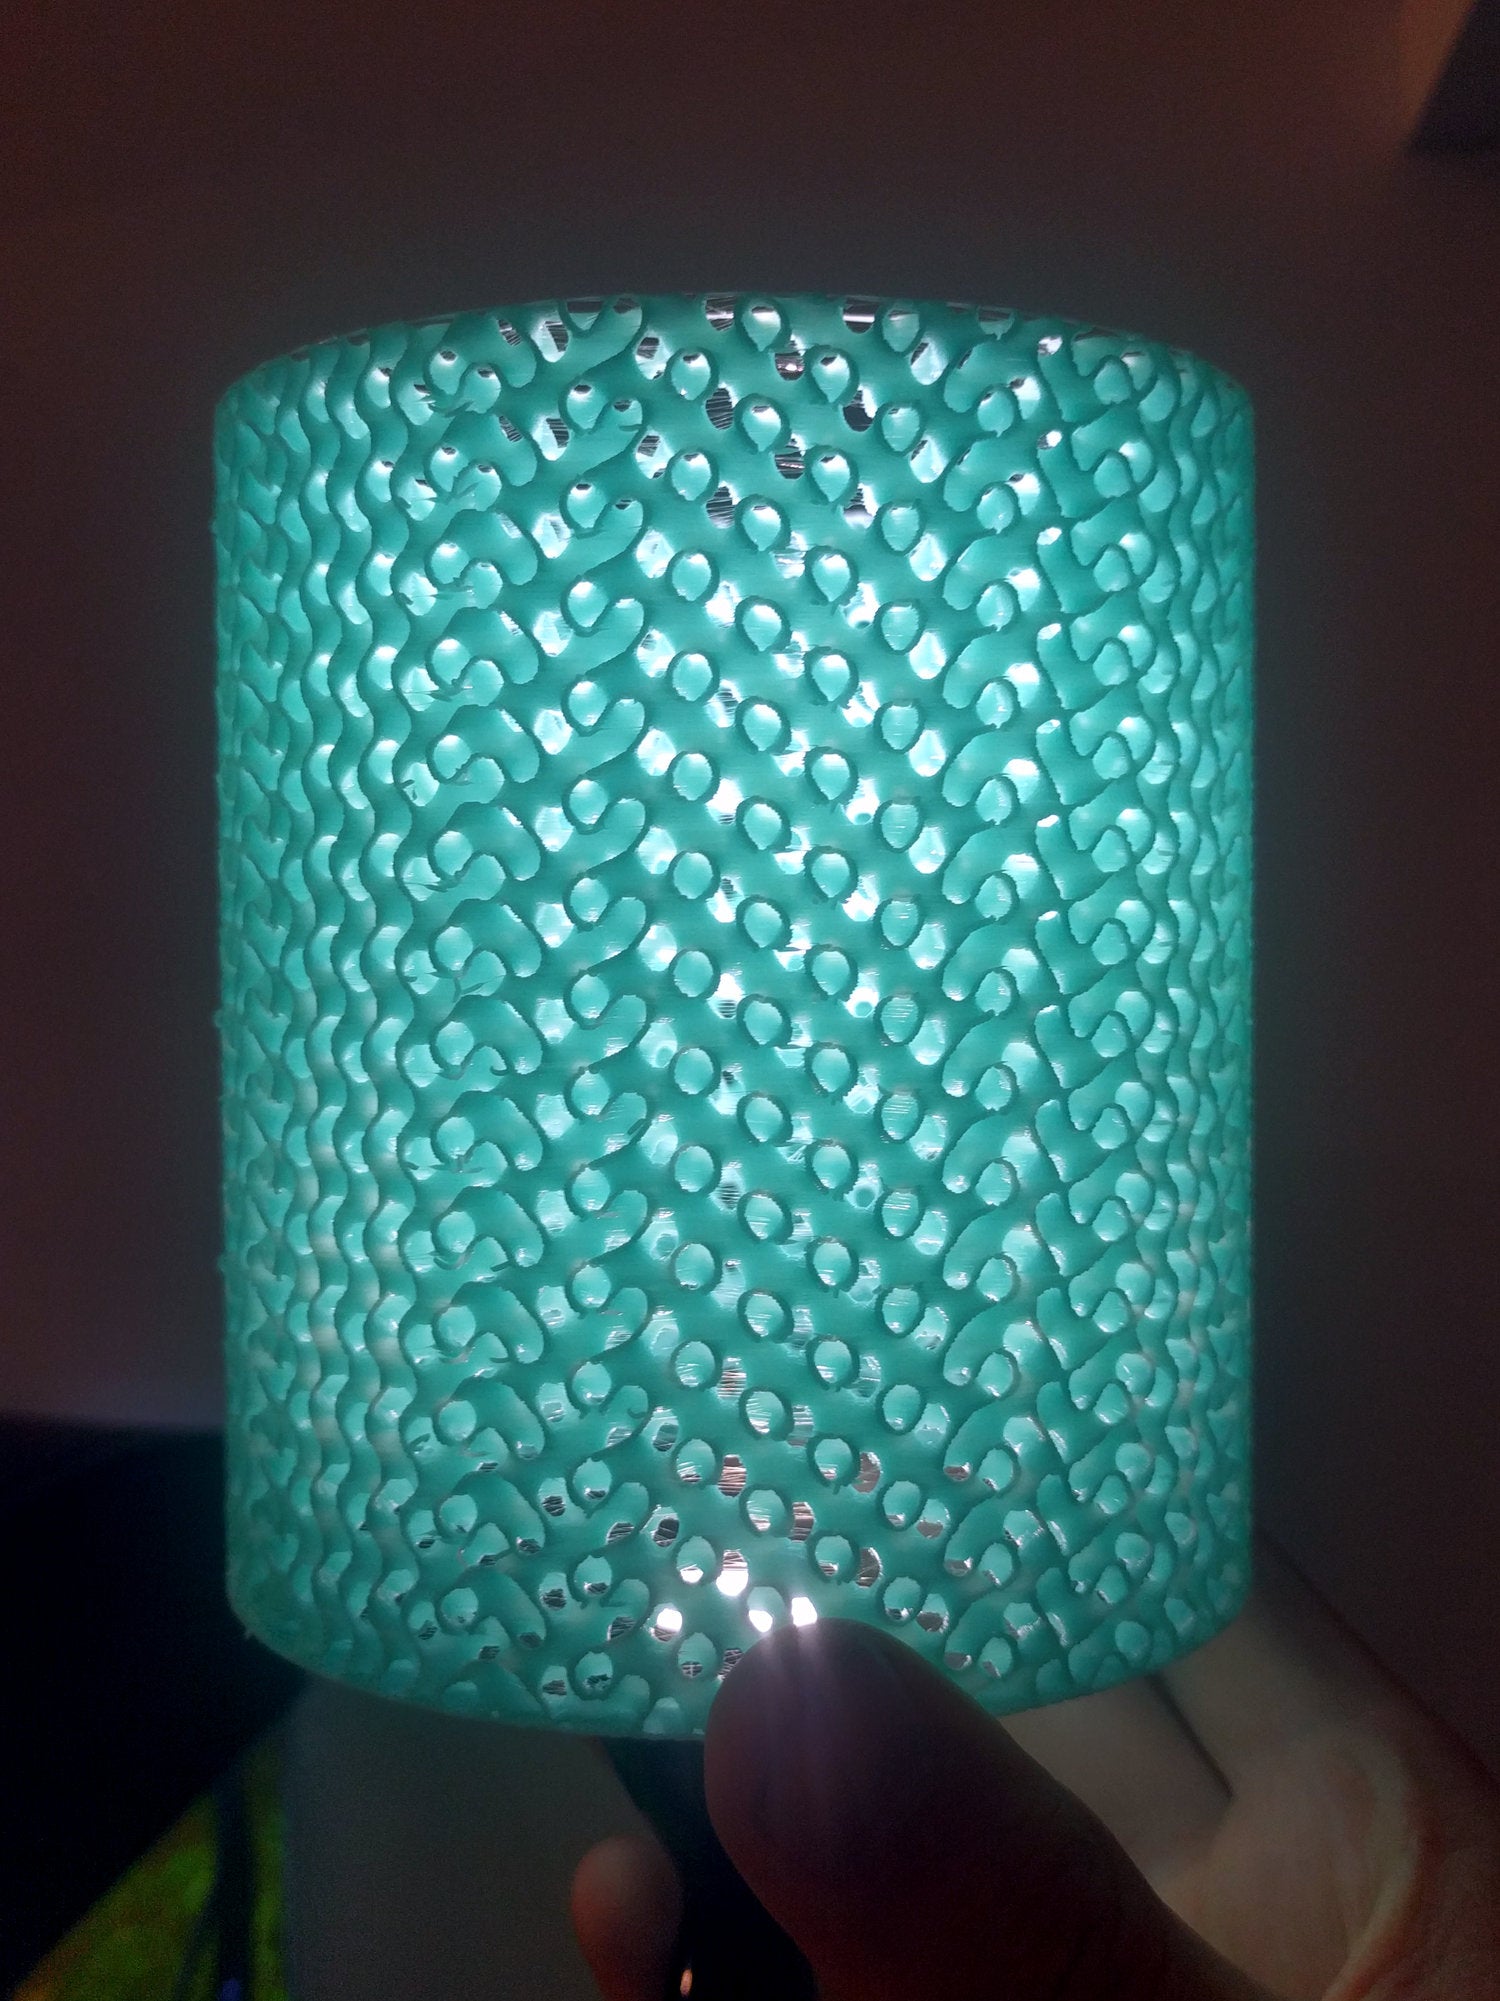 Blue cylinder printed with gyroid infill showing light shine through